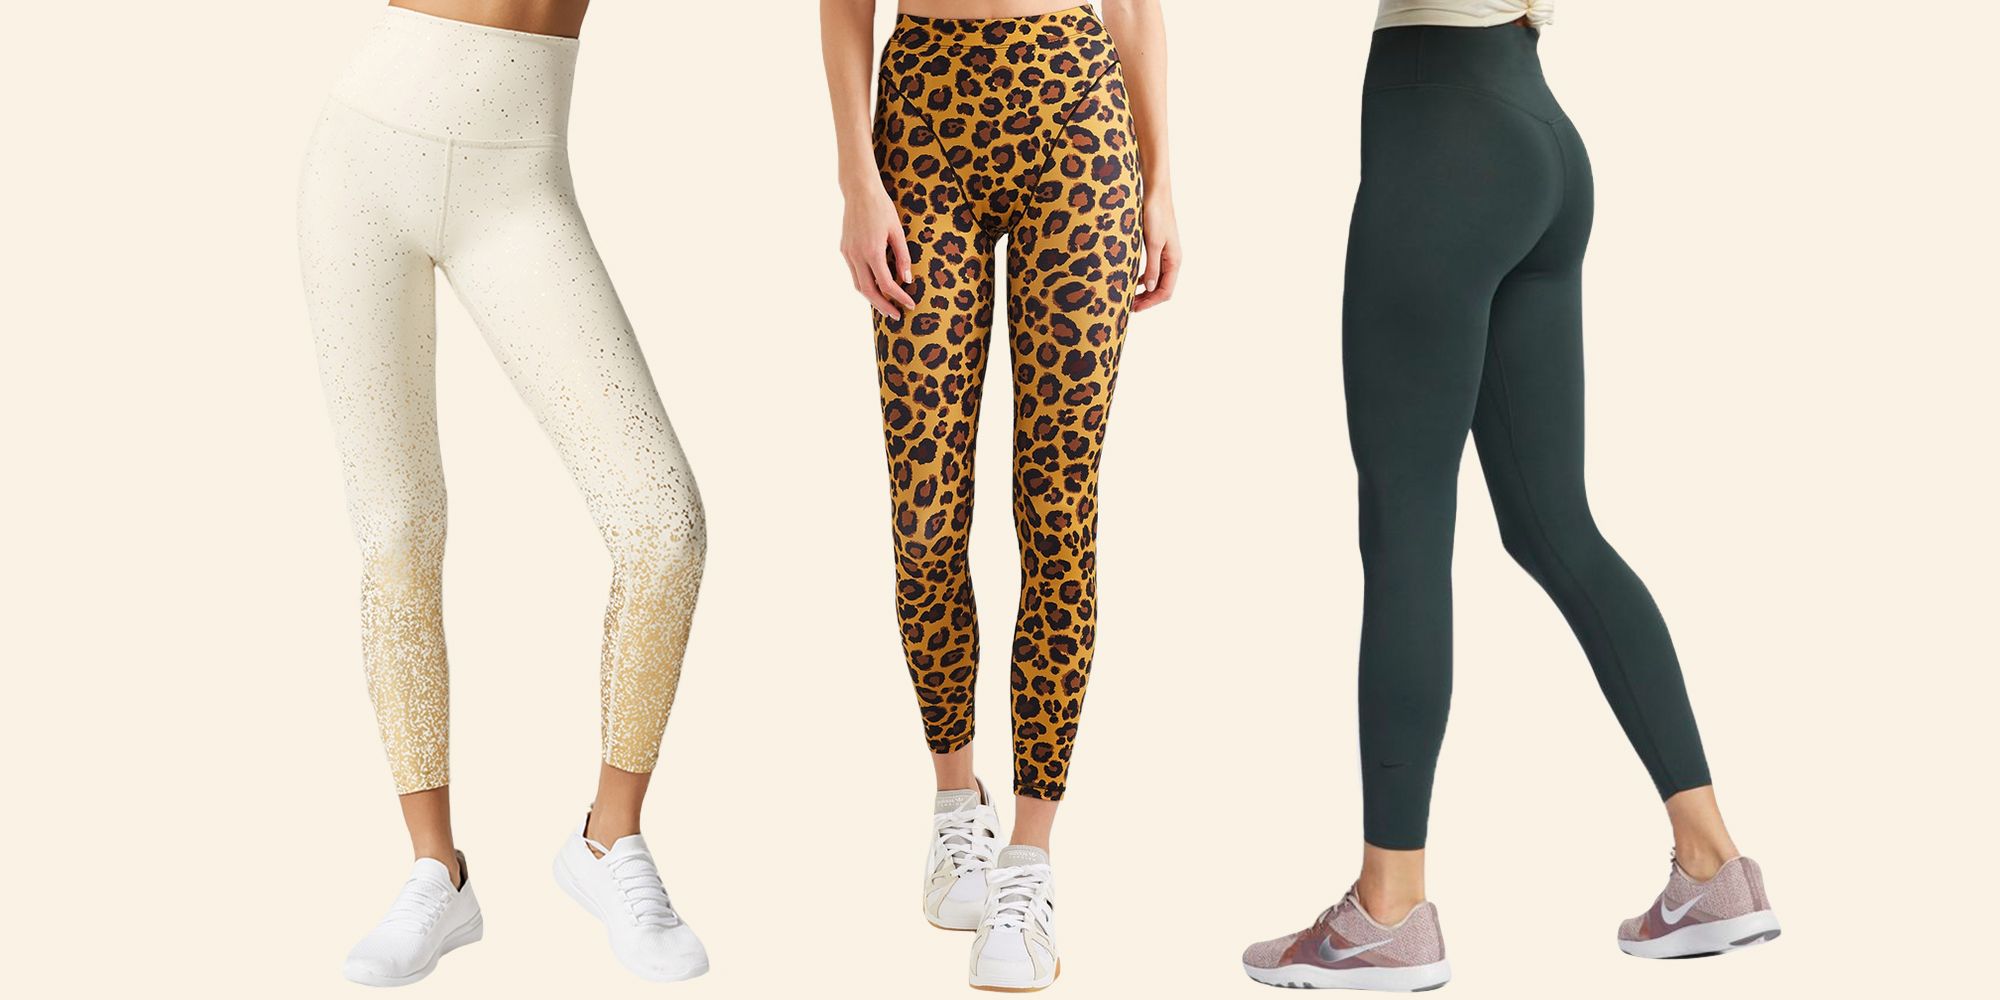 Reviews Of 14 Yoga Pants That Feel As Good As They Look | HuffPost Style